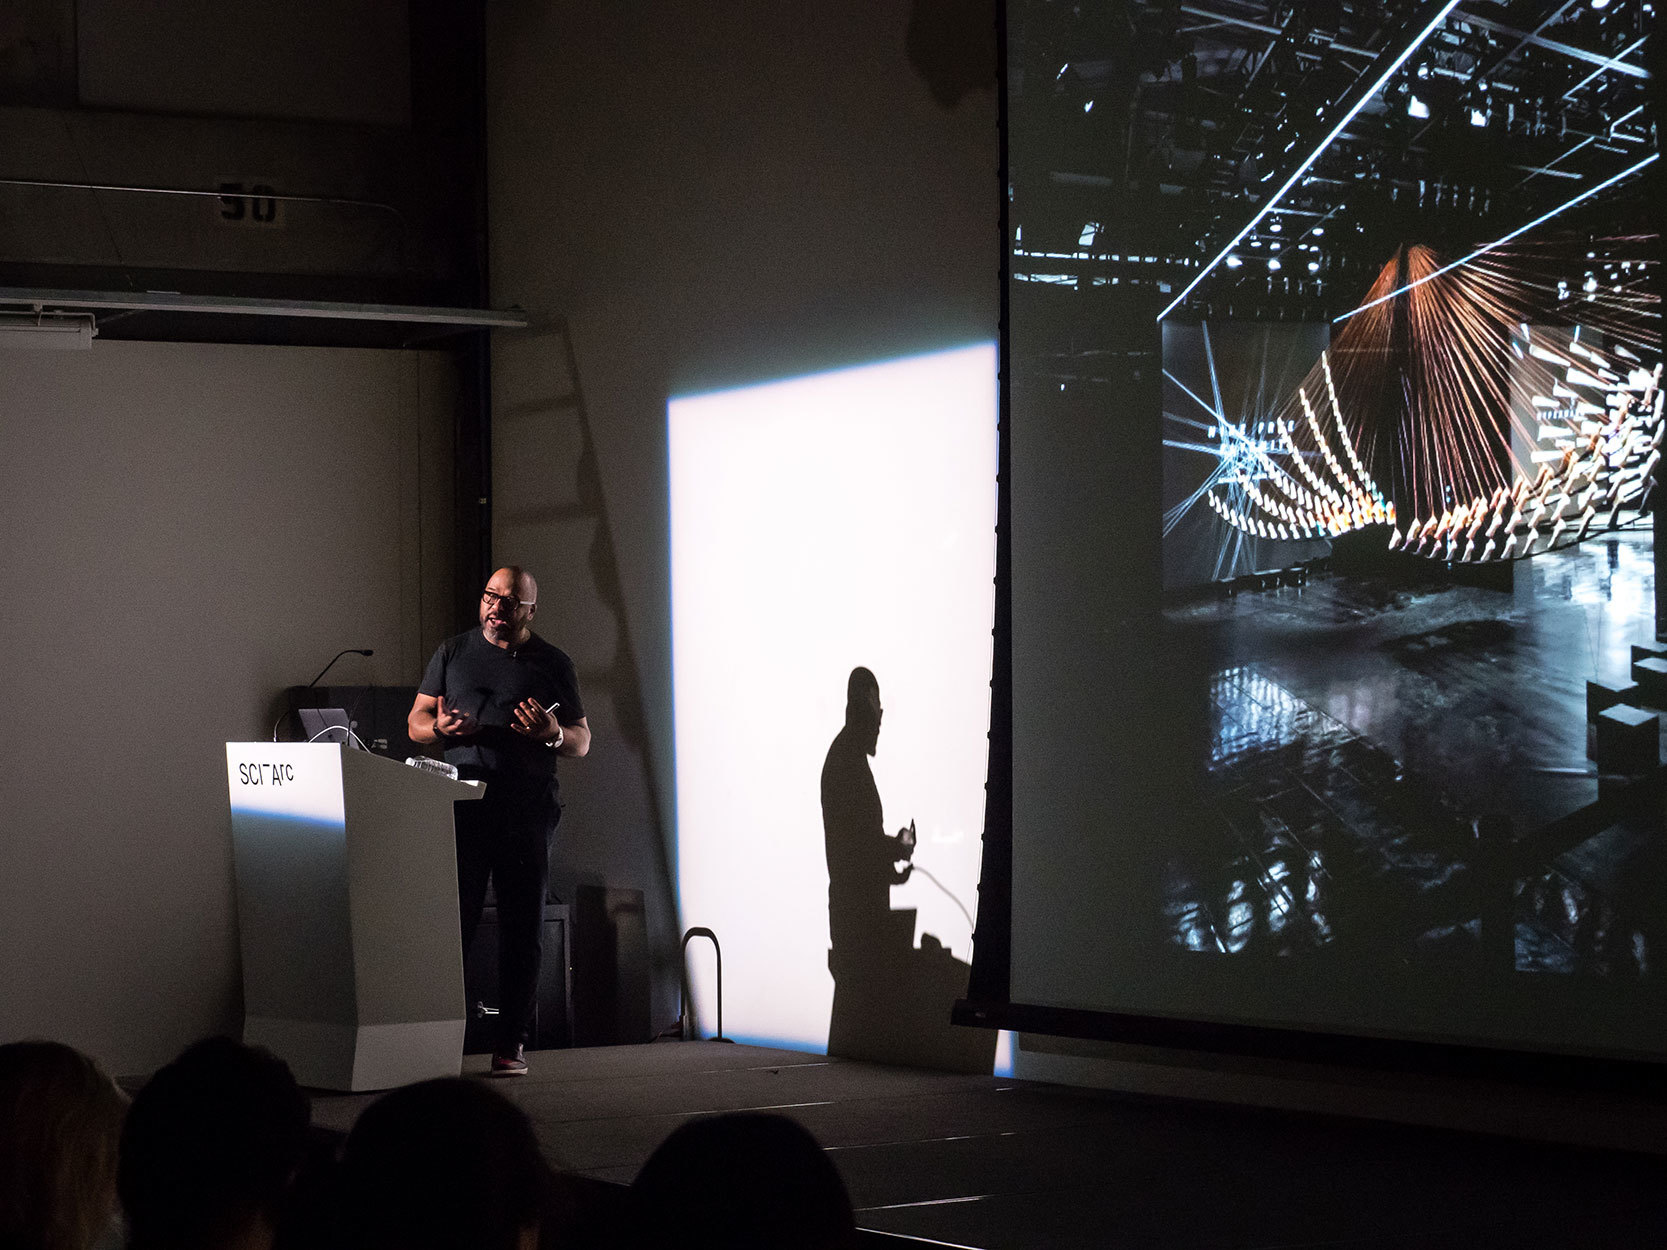 Bryon Merritt presenting a lecture to SCI-Arc faculties and Students